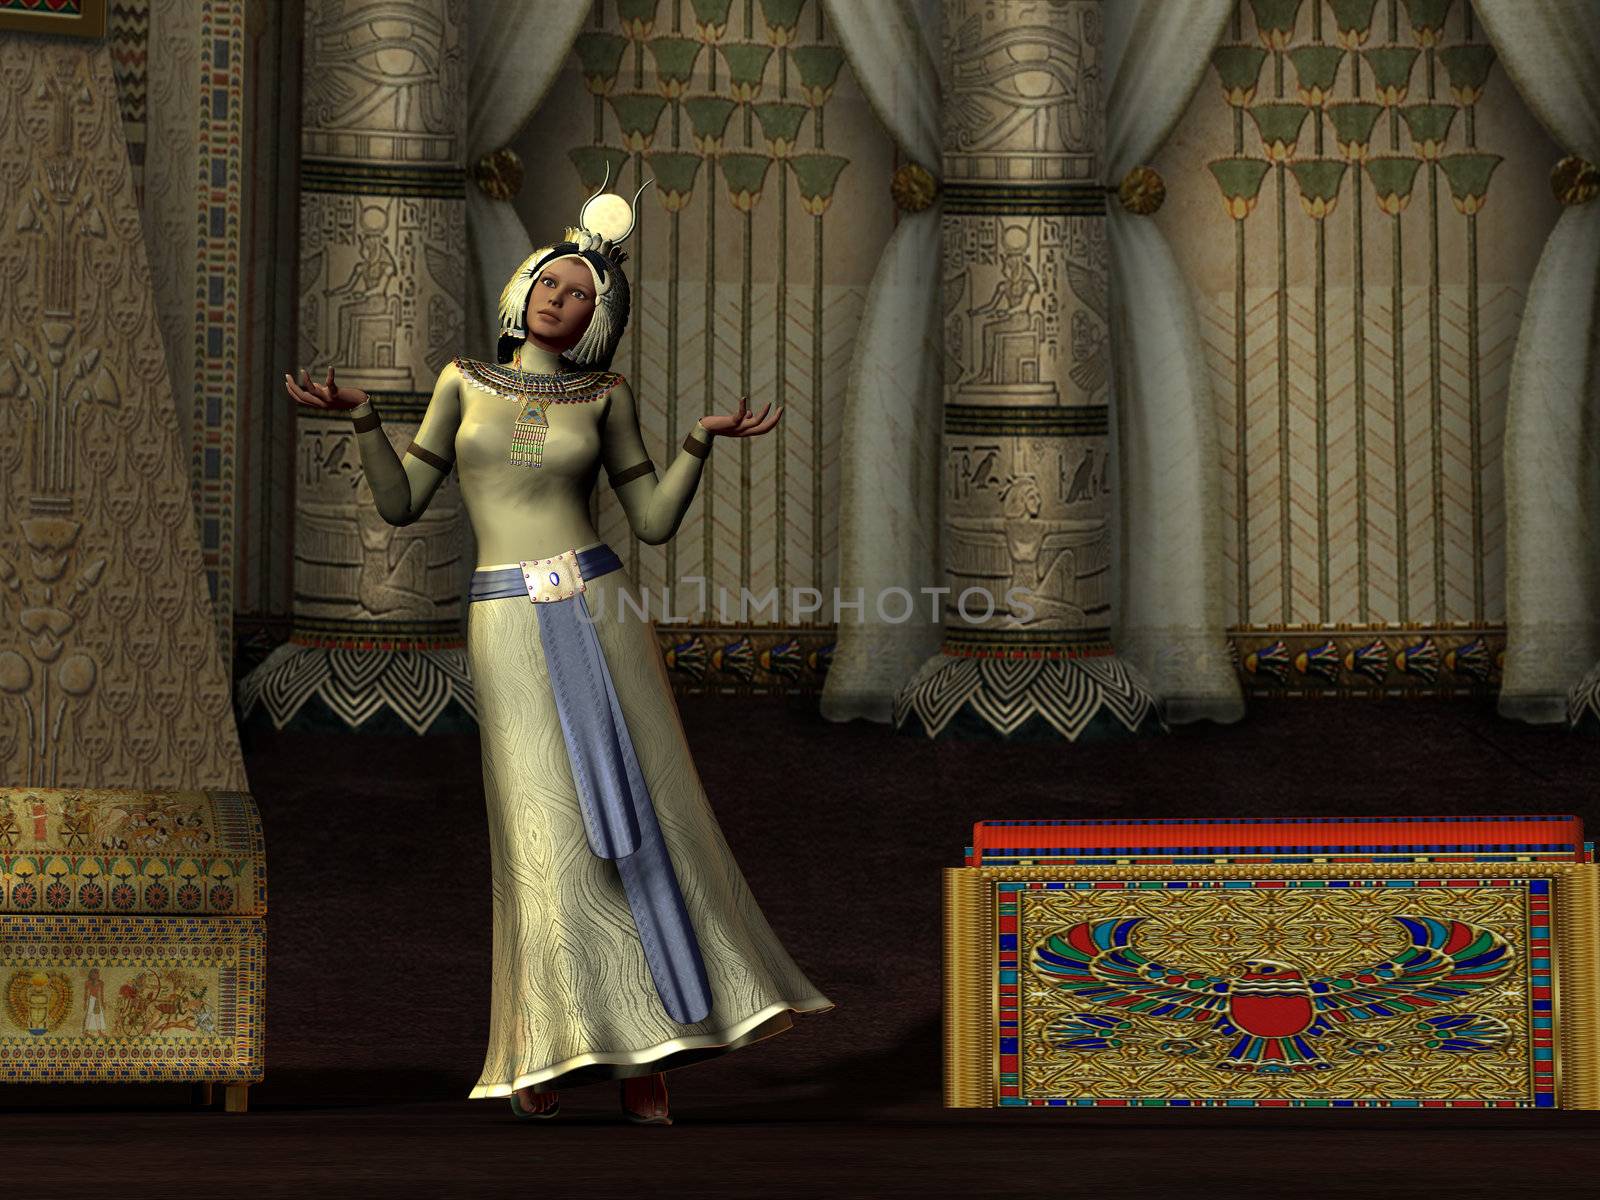 An Egyptian queen dances for the pharaoh in her palace chambers.